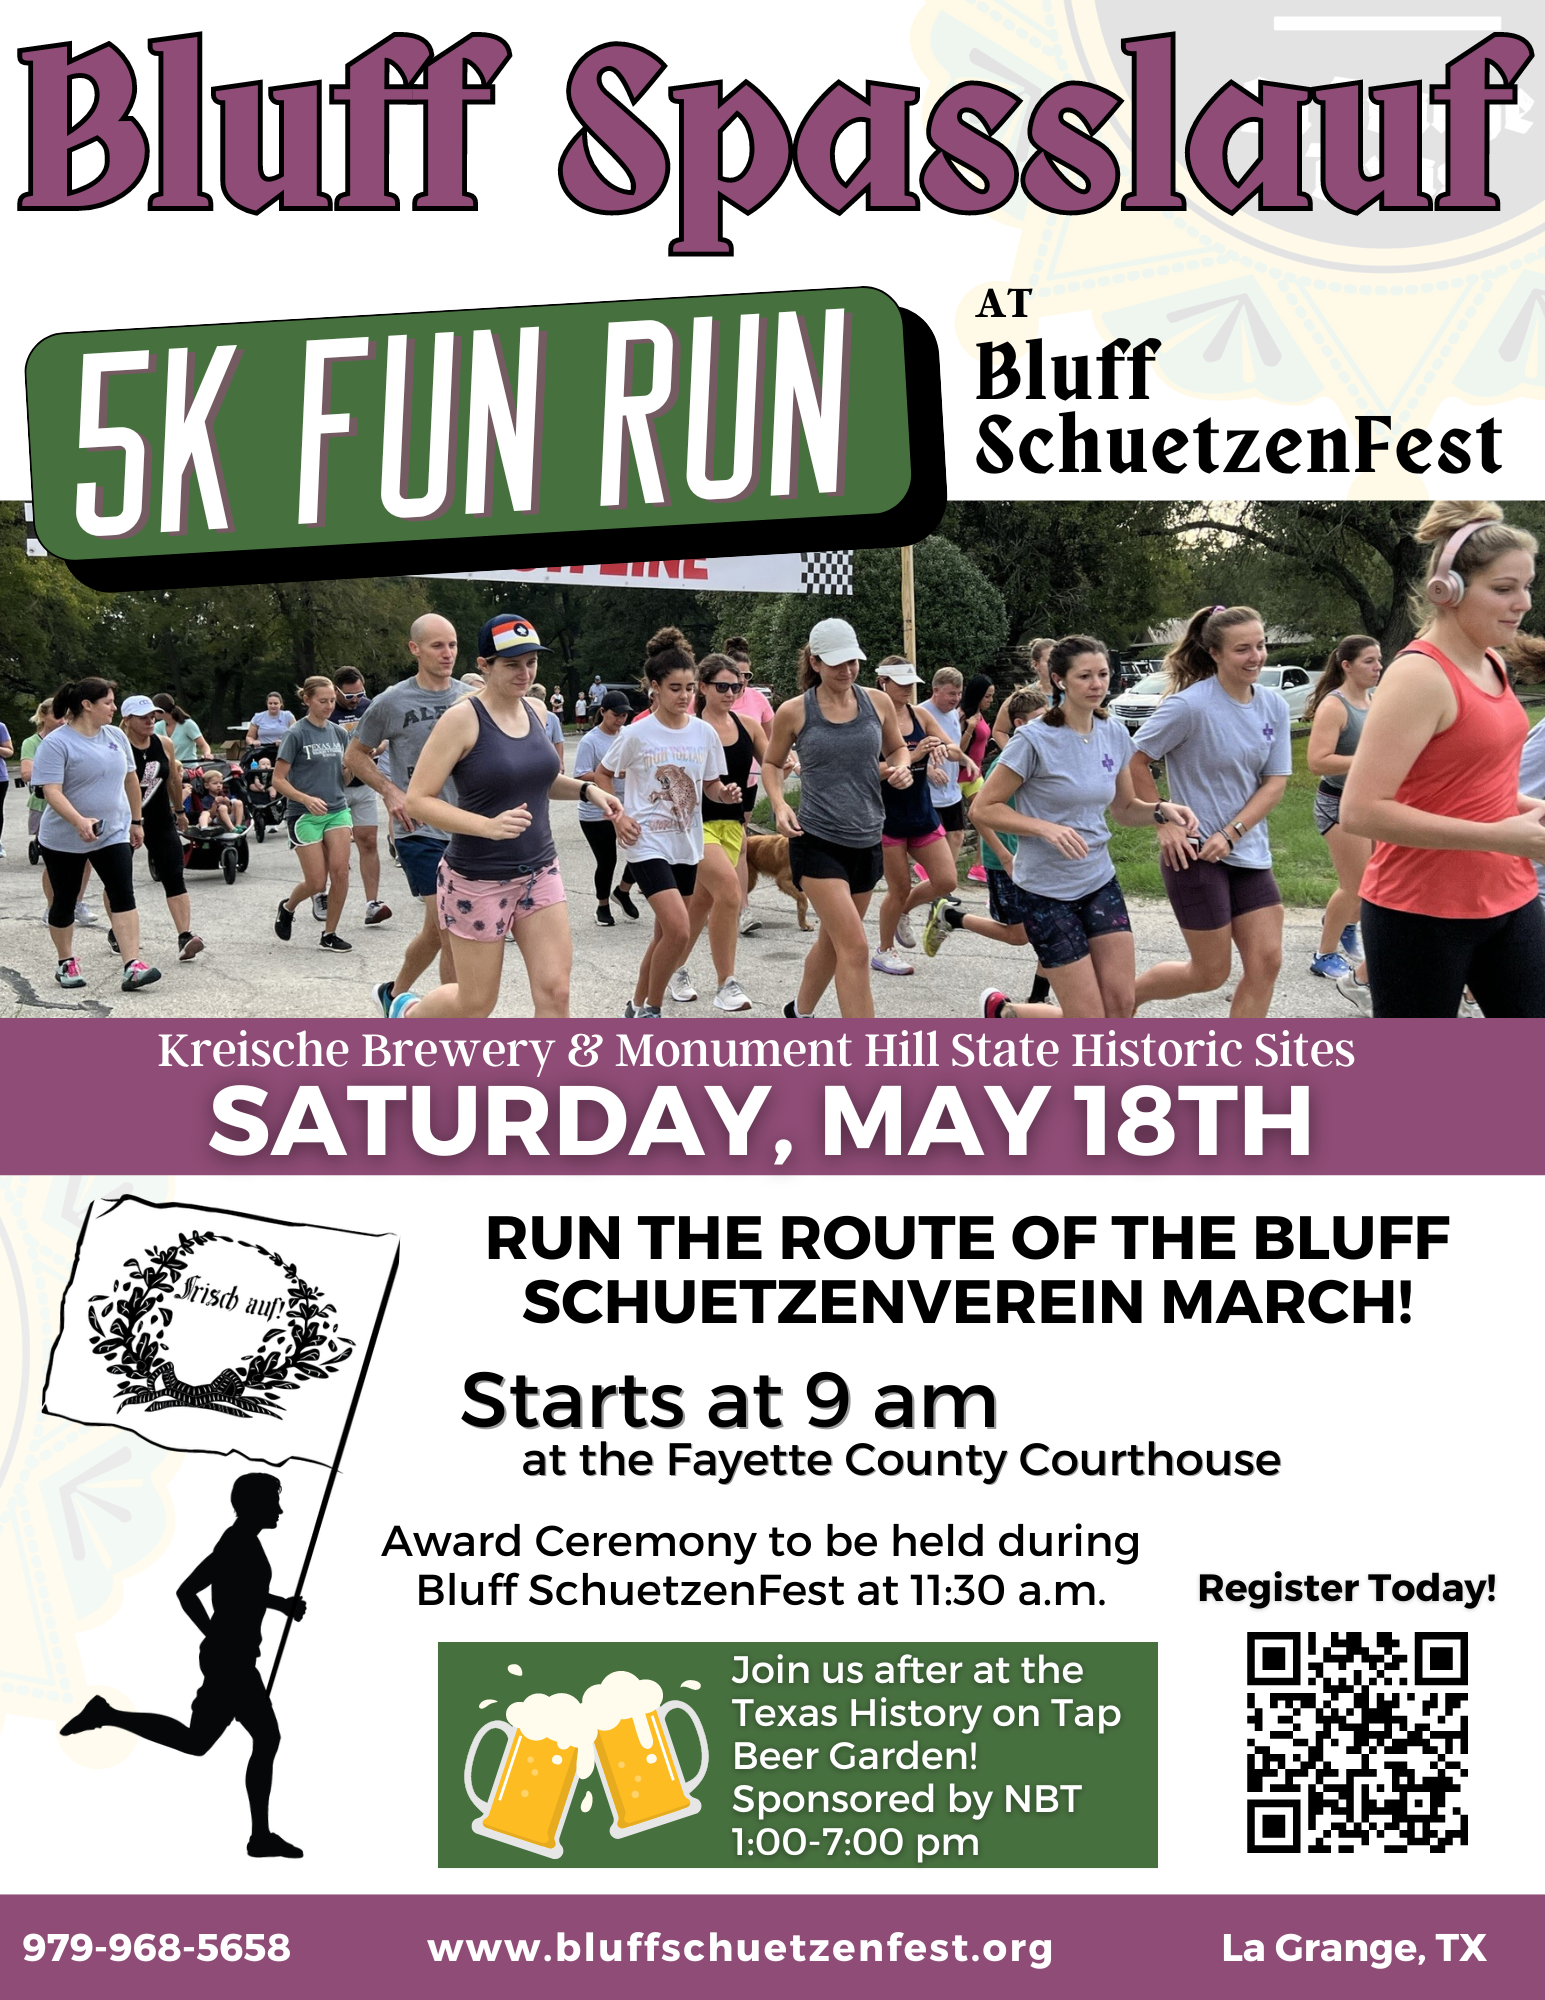 A poster with advertisements for the Bluff Spasslauf Fun Run